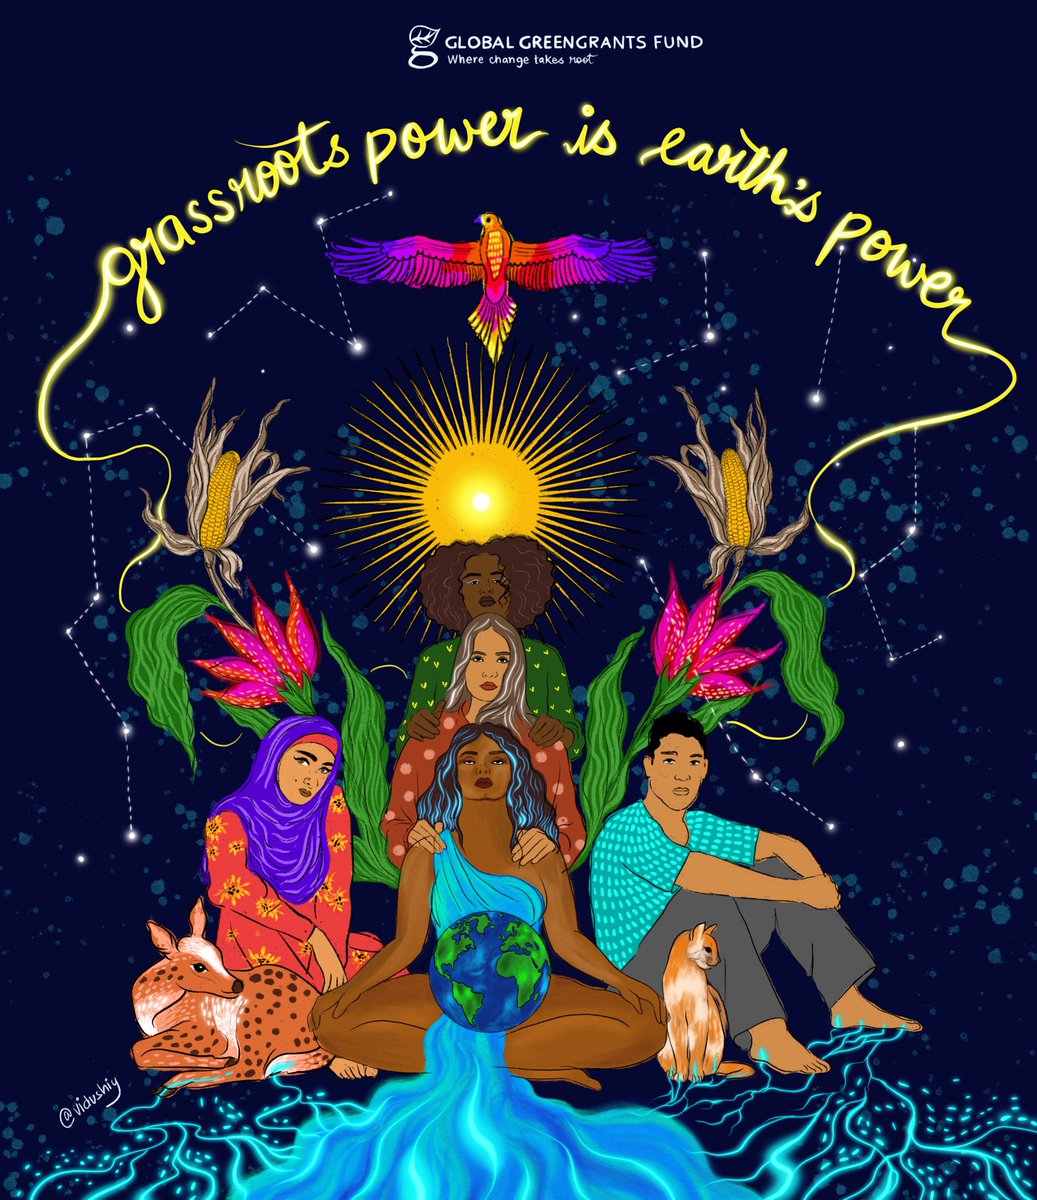 This #EarthDay, we partnered with @vidushiy to celebrate the interconnectedness of people, the planet, and all ecosystems and biodiversity. We honor the grassroots environmental justice groups who see and celebrate that interconnectedness. Grassroots power is Earth’s power 🌍✊